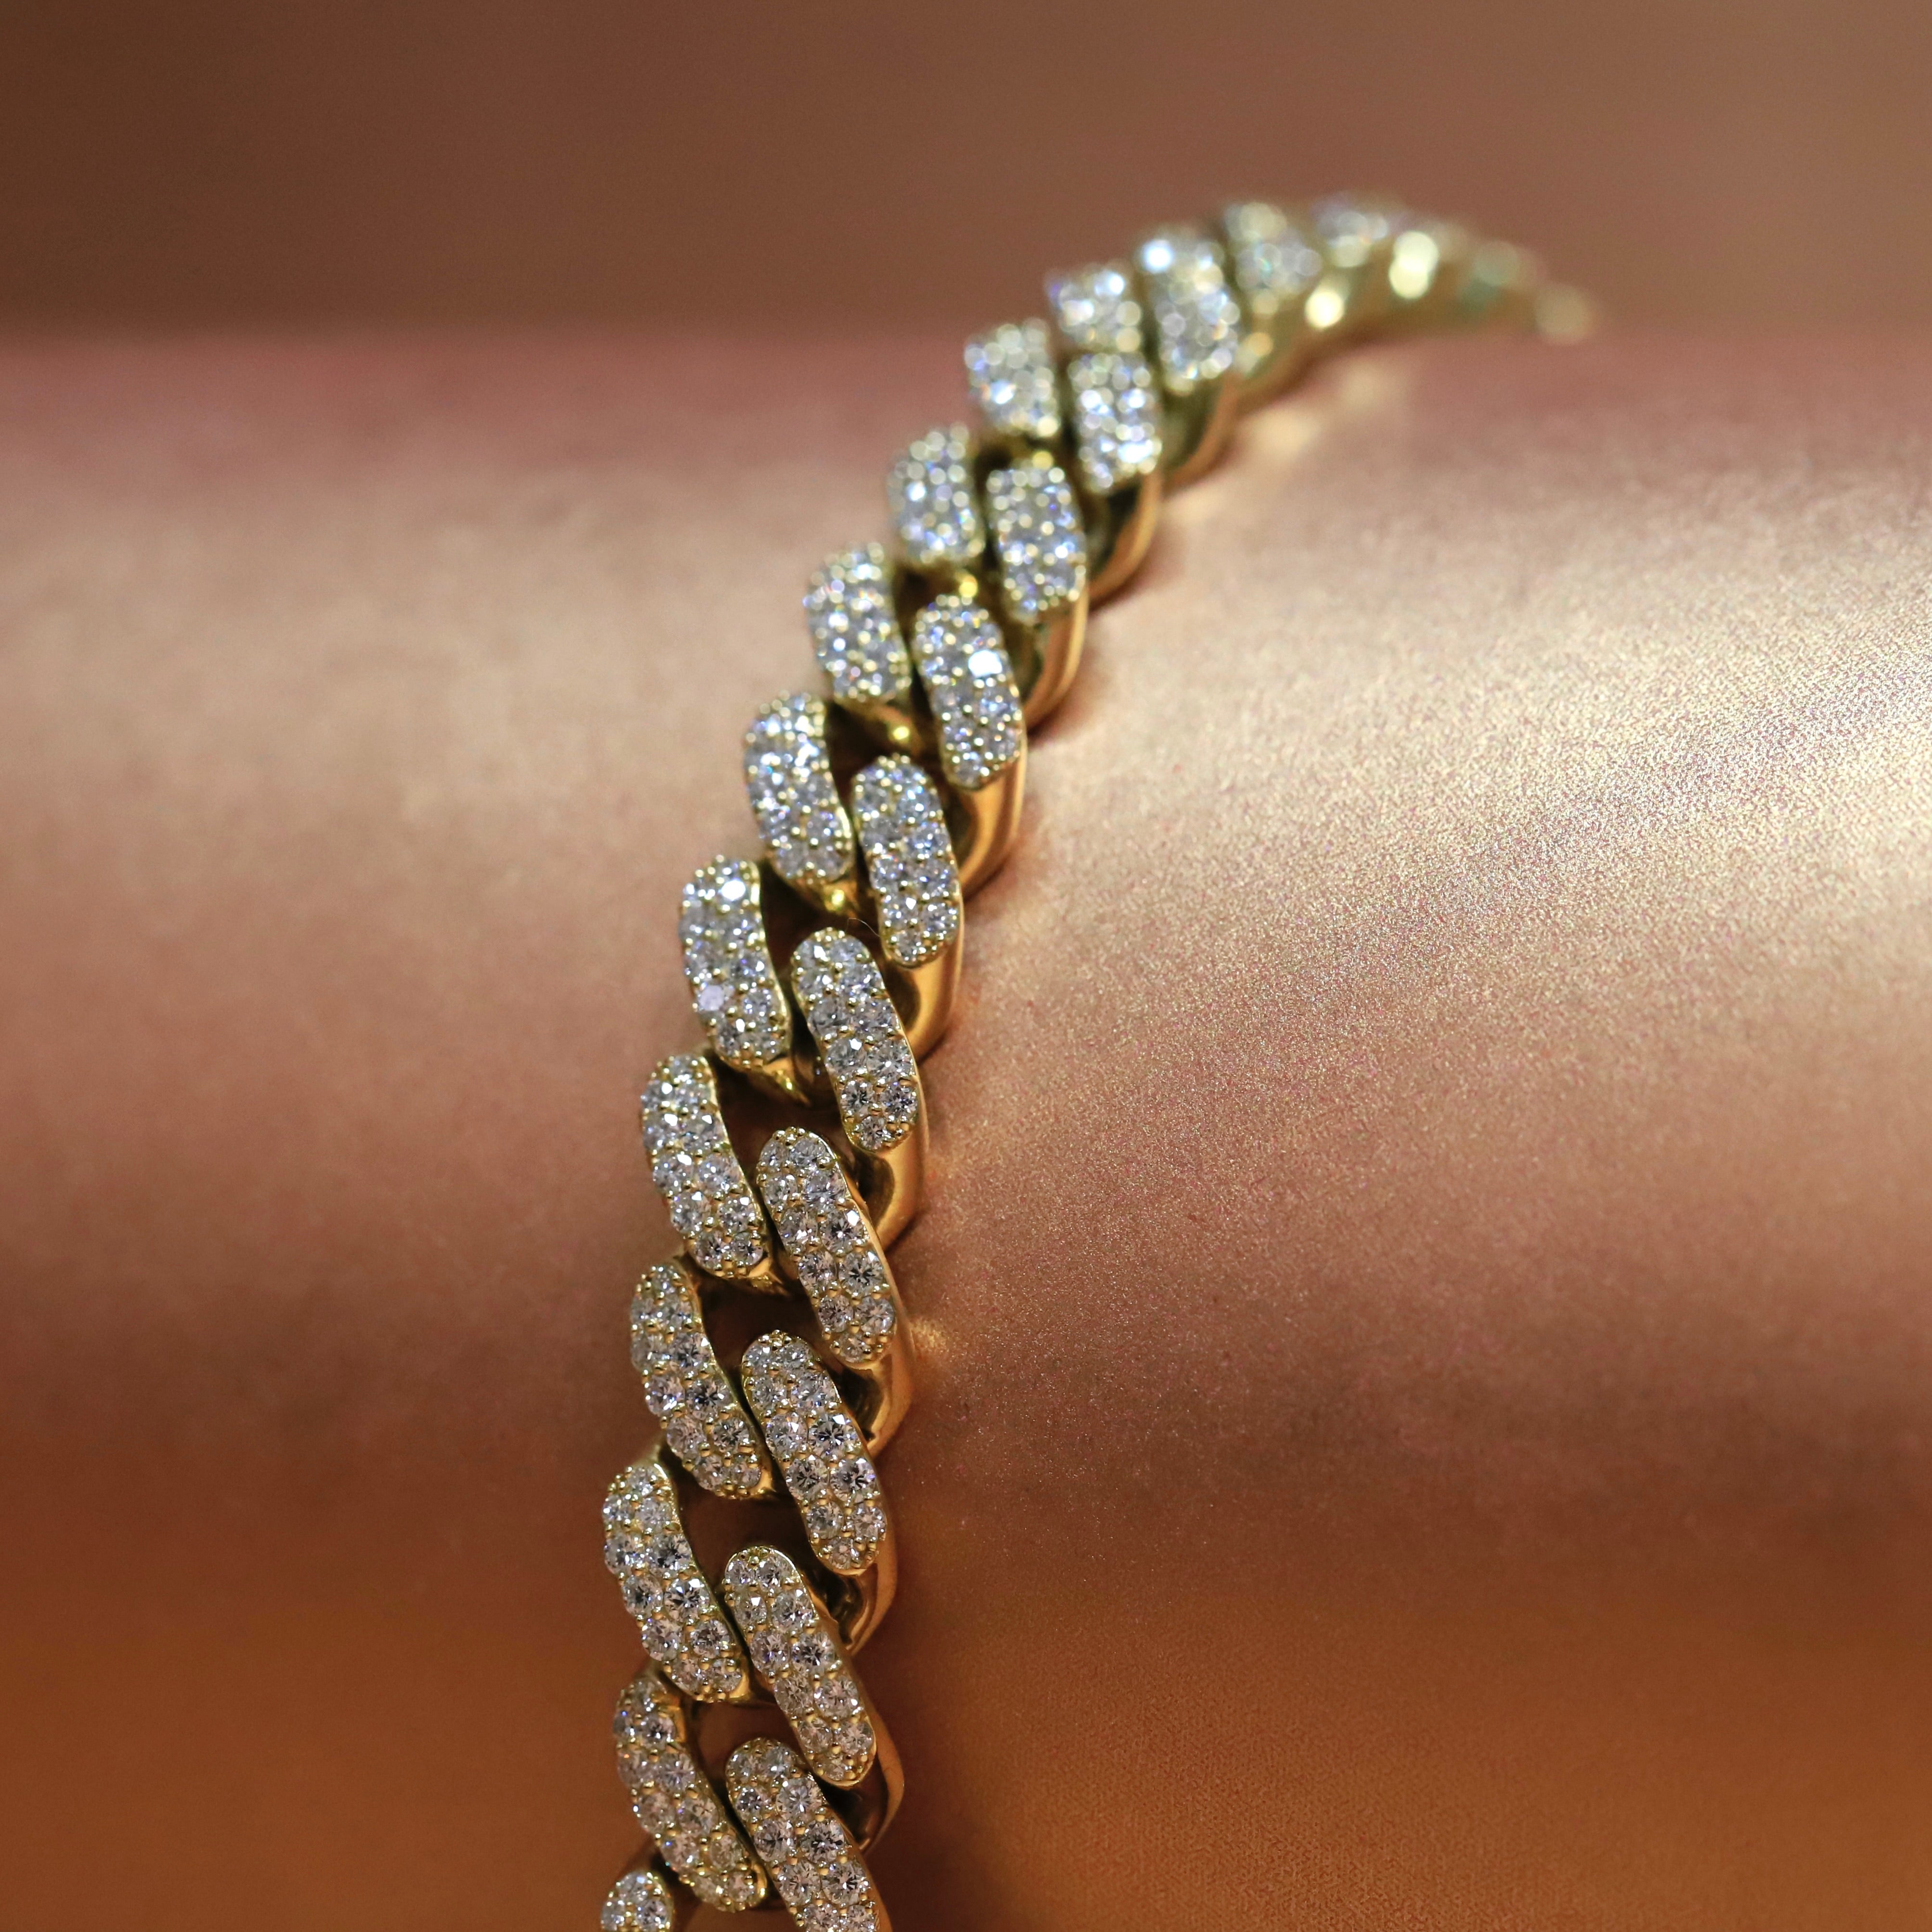 18ct Yellow Gold Cuff Chain Link Bracelet | Auric Jewellery